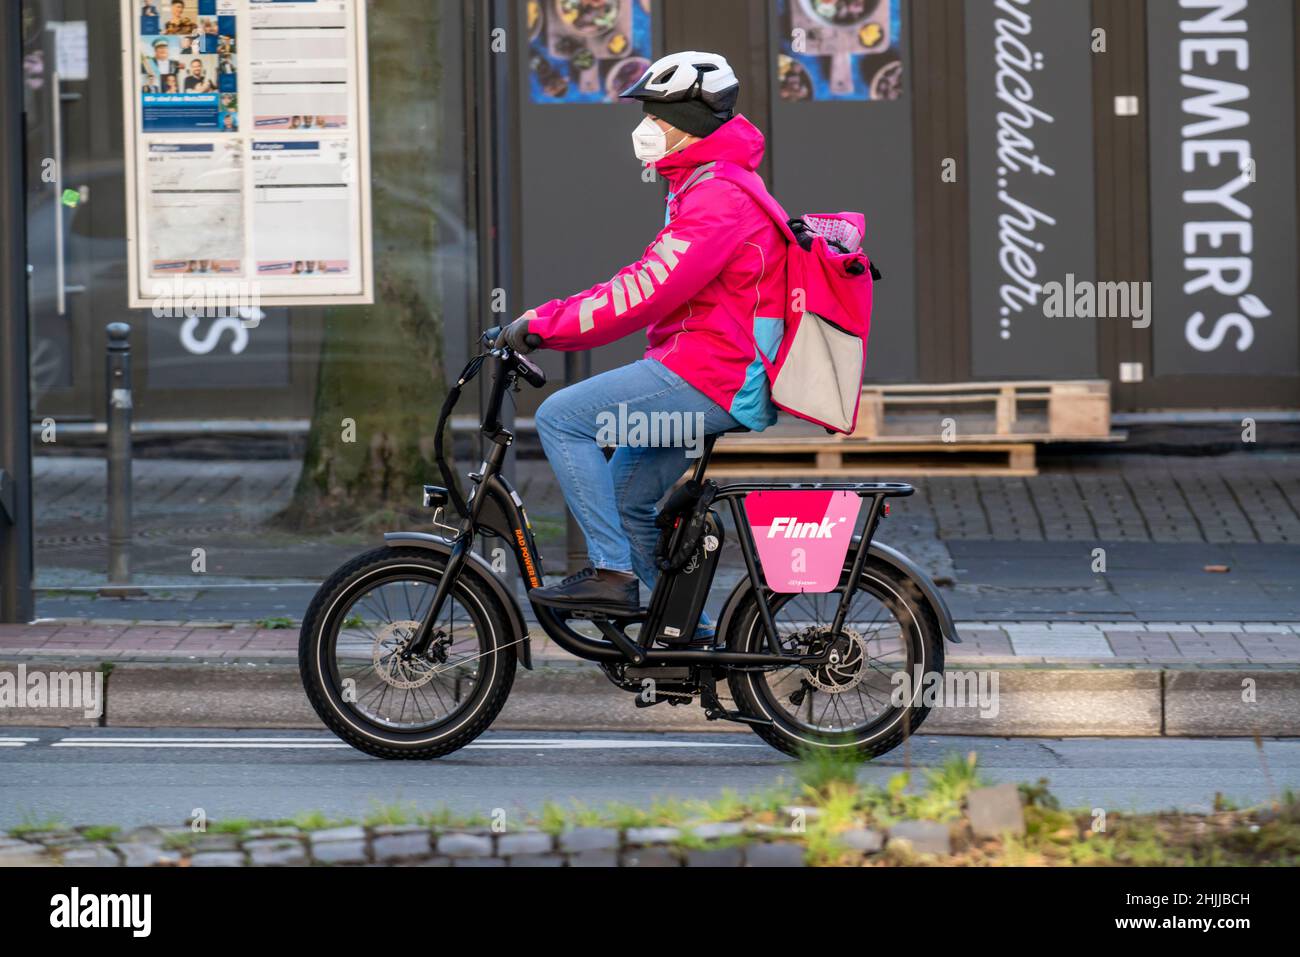 Bicycle courier of the fast delivery service Flink, delivers groceries, in currently over 40 German cities, within 10 minutes, orders via an app, work Stock Photo